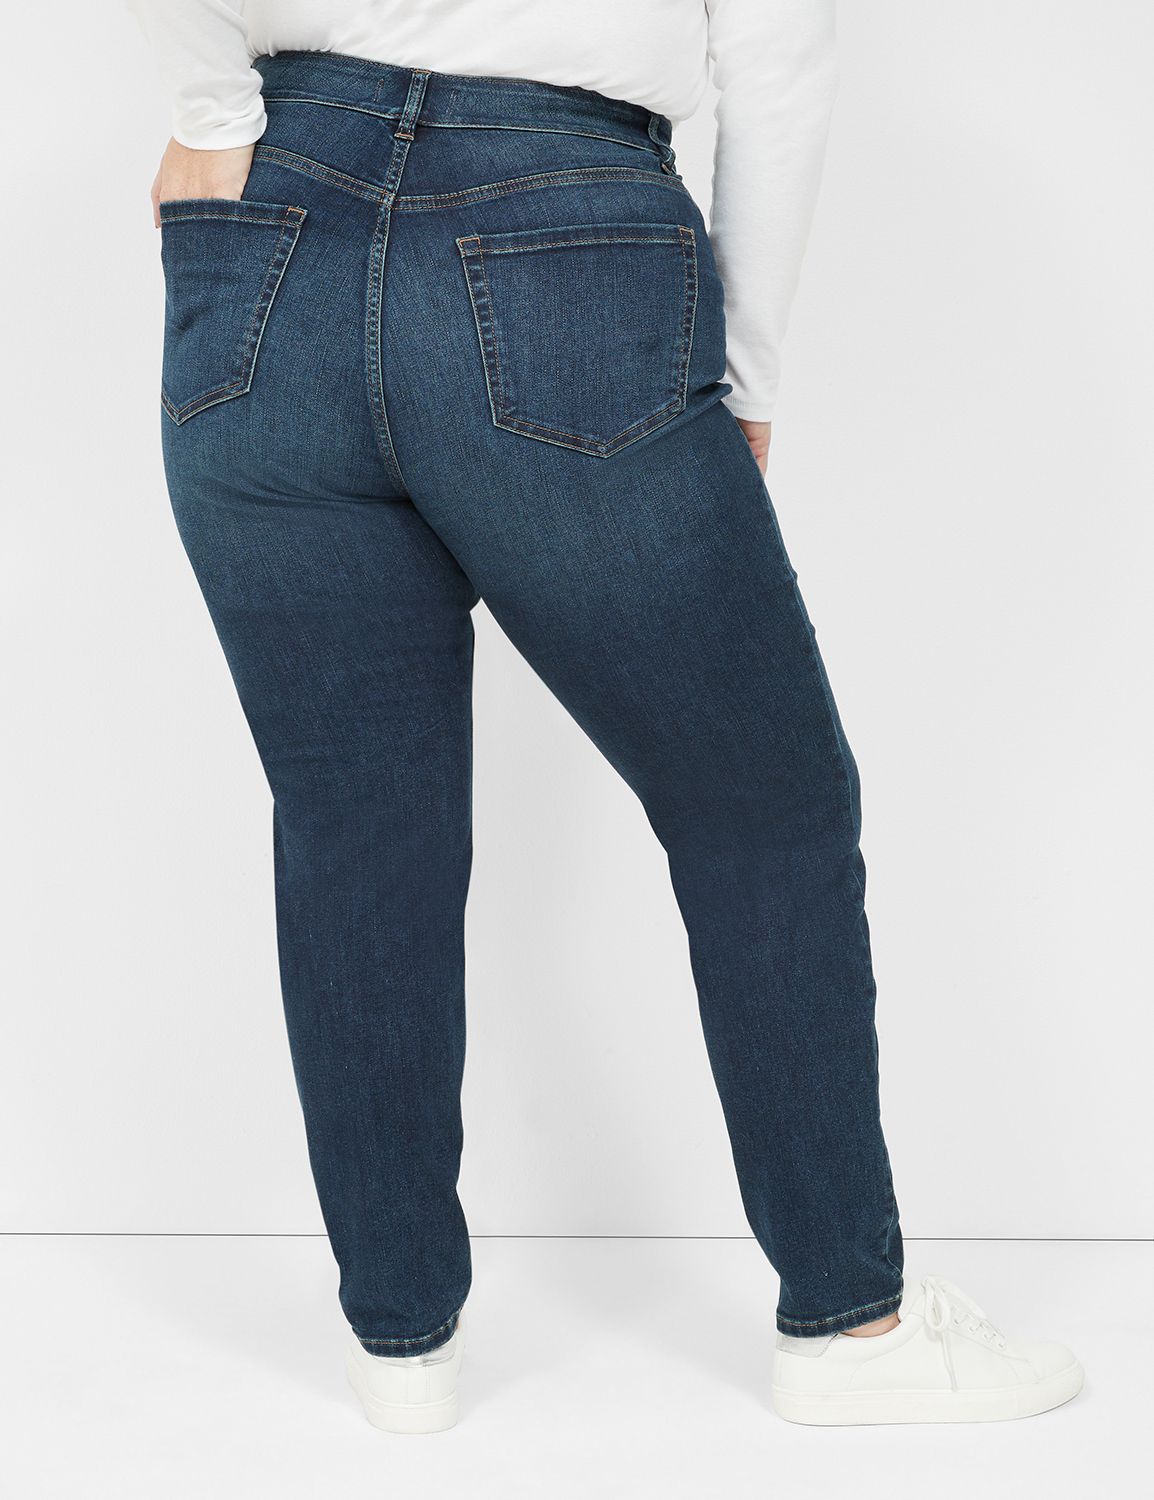 Jean Haul - Stretchy, High Waist and Curvy girl approved! 